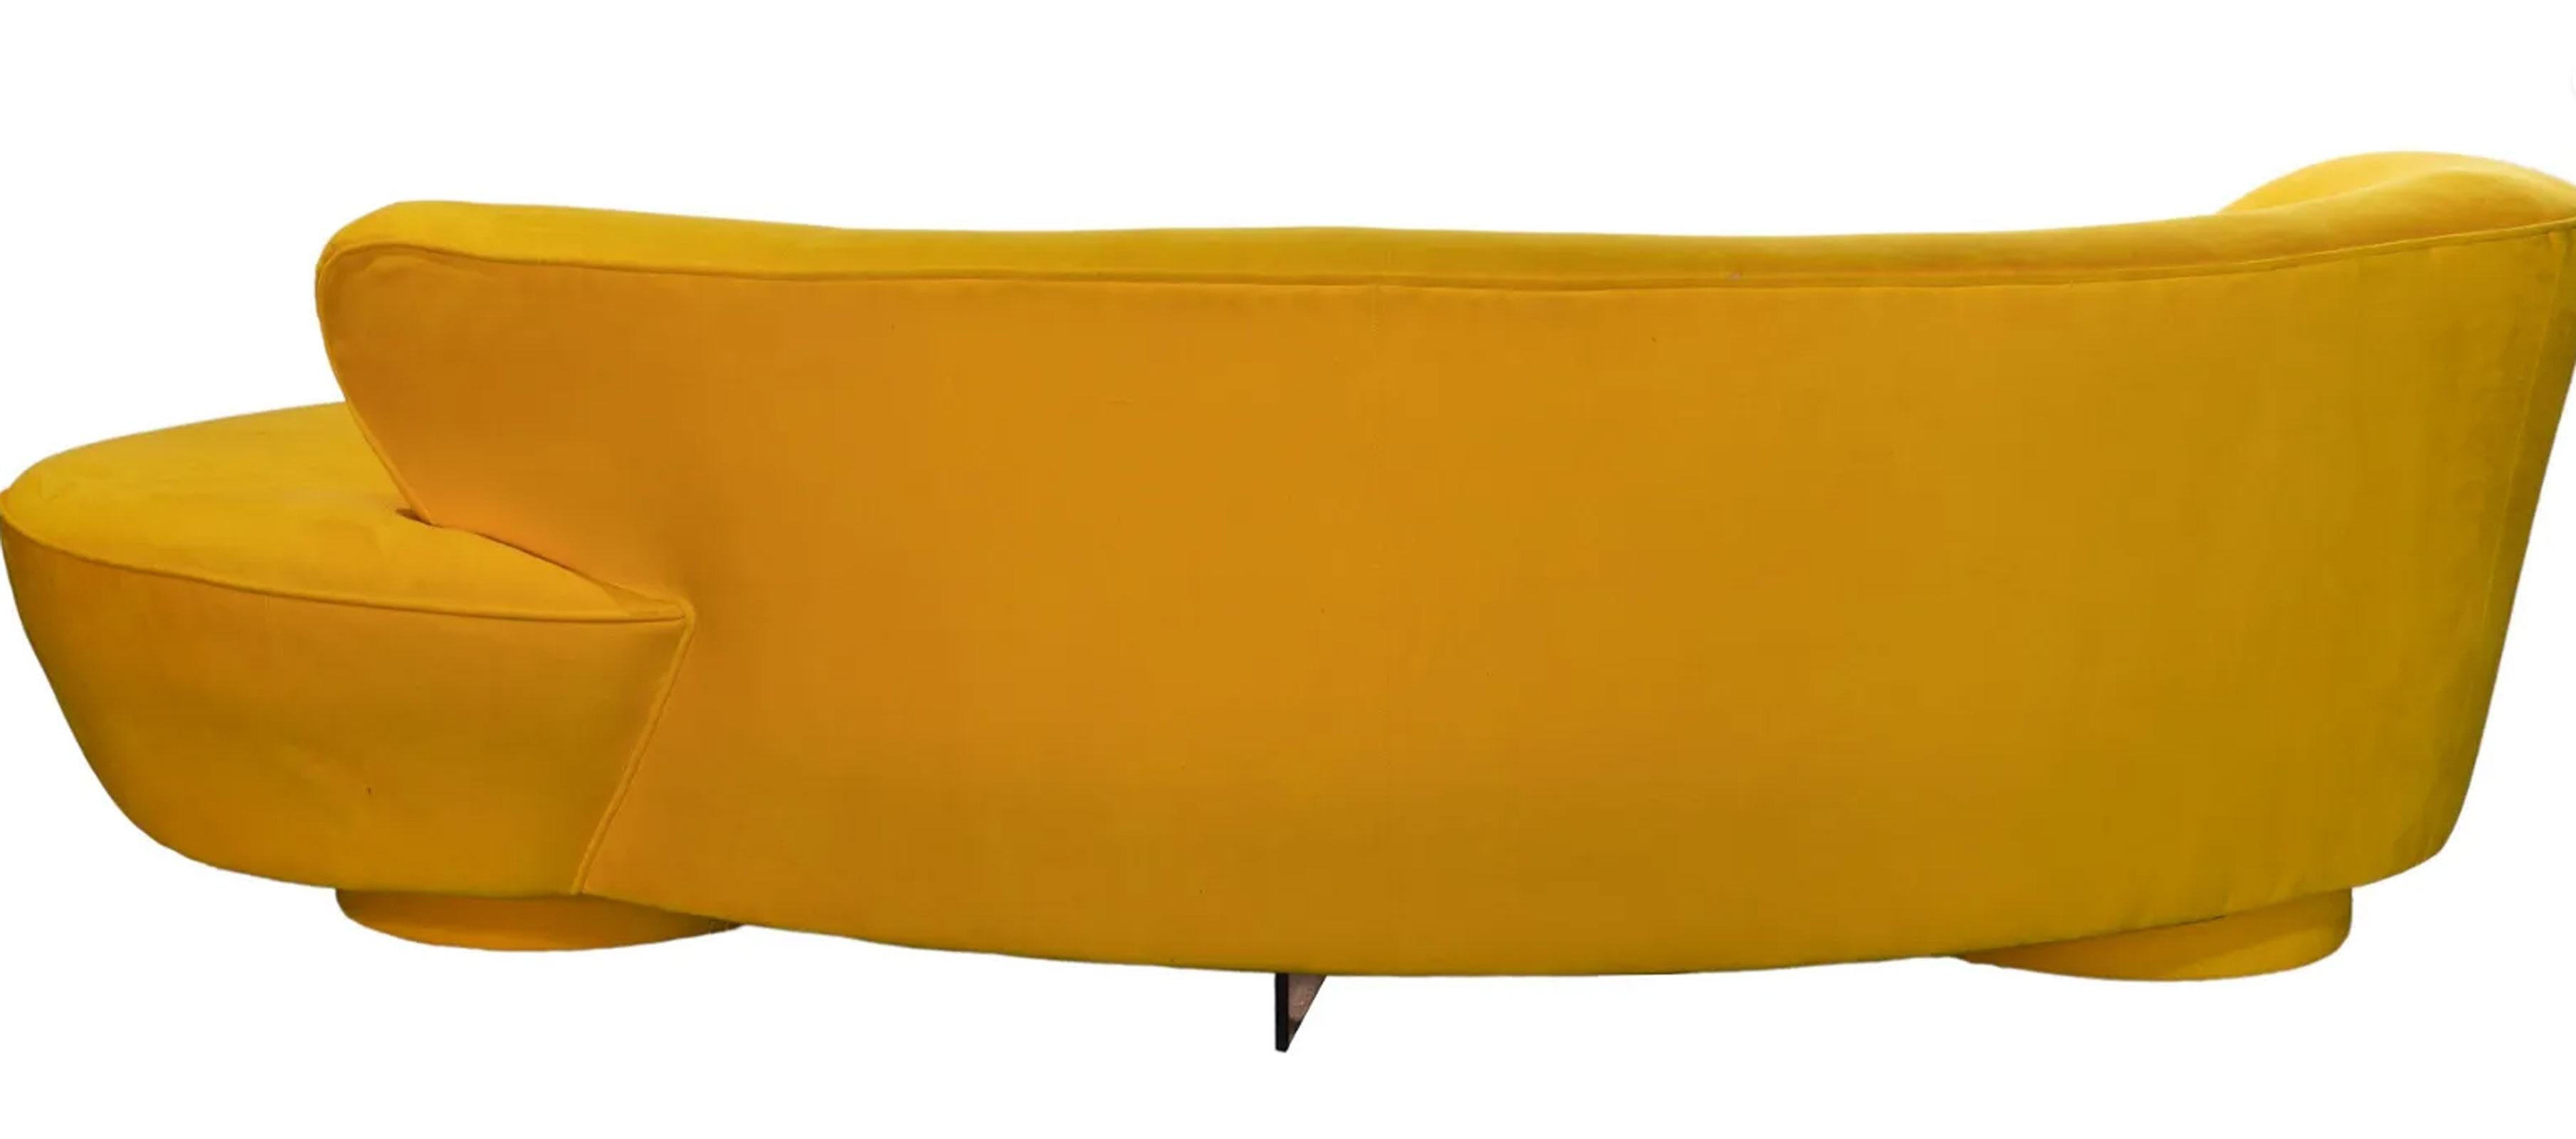 Ready for upholstery of choice. We can help with reupholstery. Vladimir Kagan serpentine sofa by Directional. 